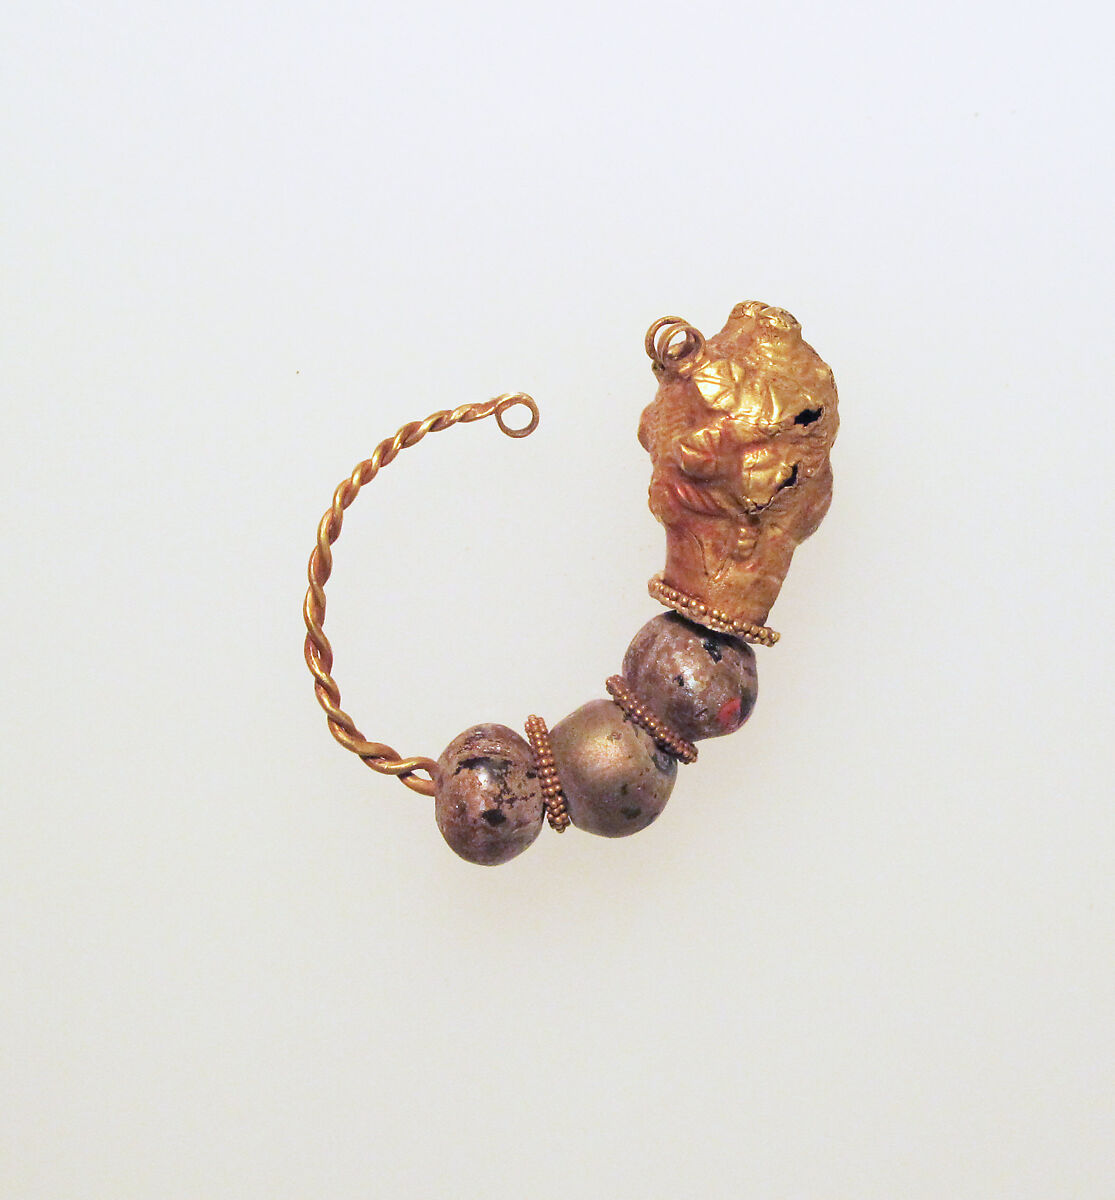 Gold earring with woman's head and glass beads, Gold, glass paste, Greek 